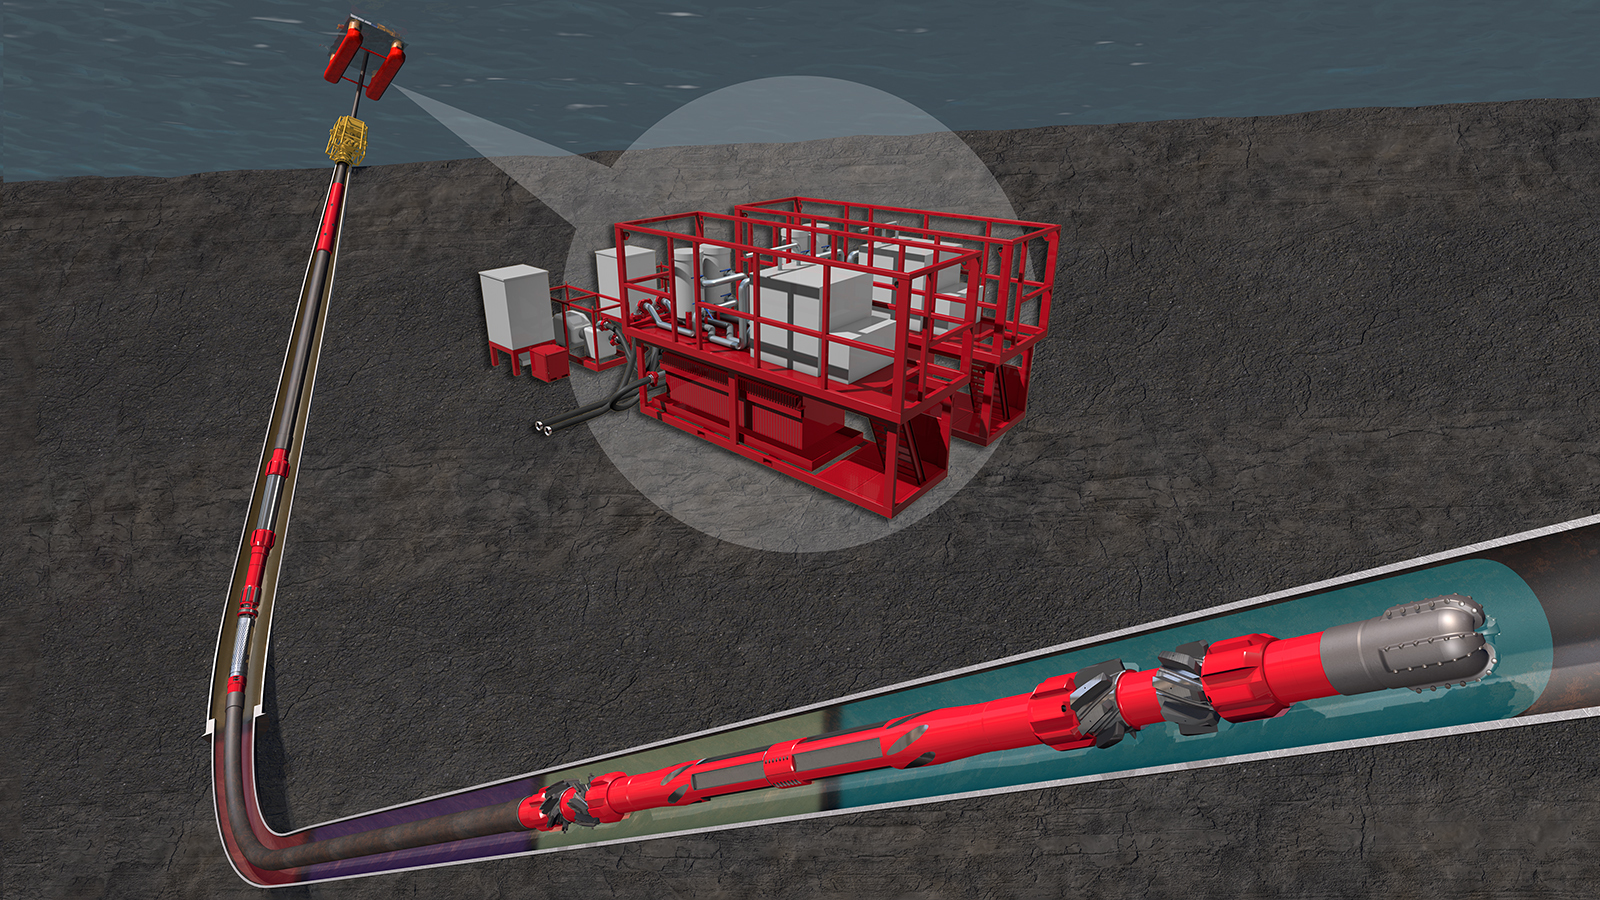 Halliburton CleanWell® Solutions: filtration services, wellbore cleanup fluids, mechanical wellbore cleaning tools, and optimized software modeling